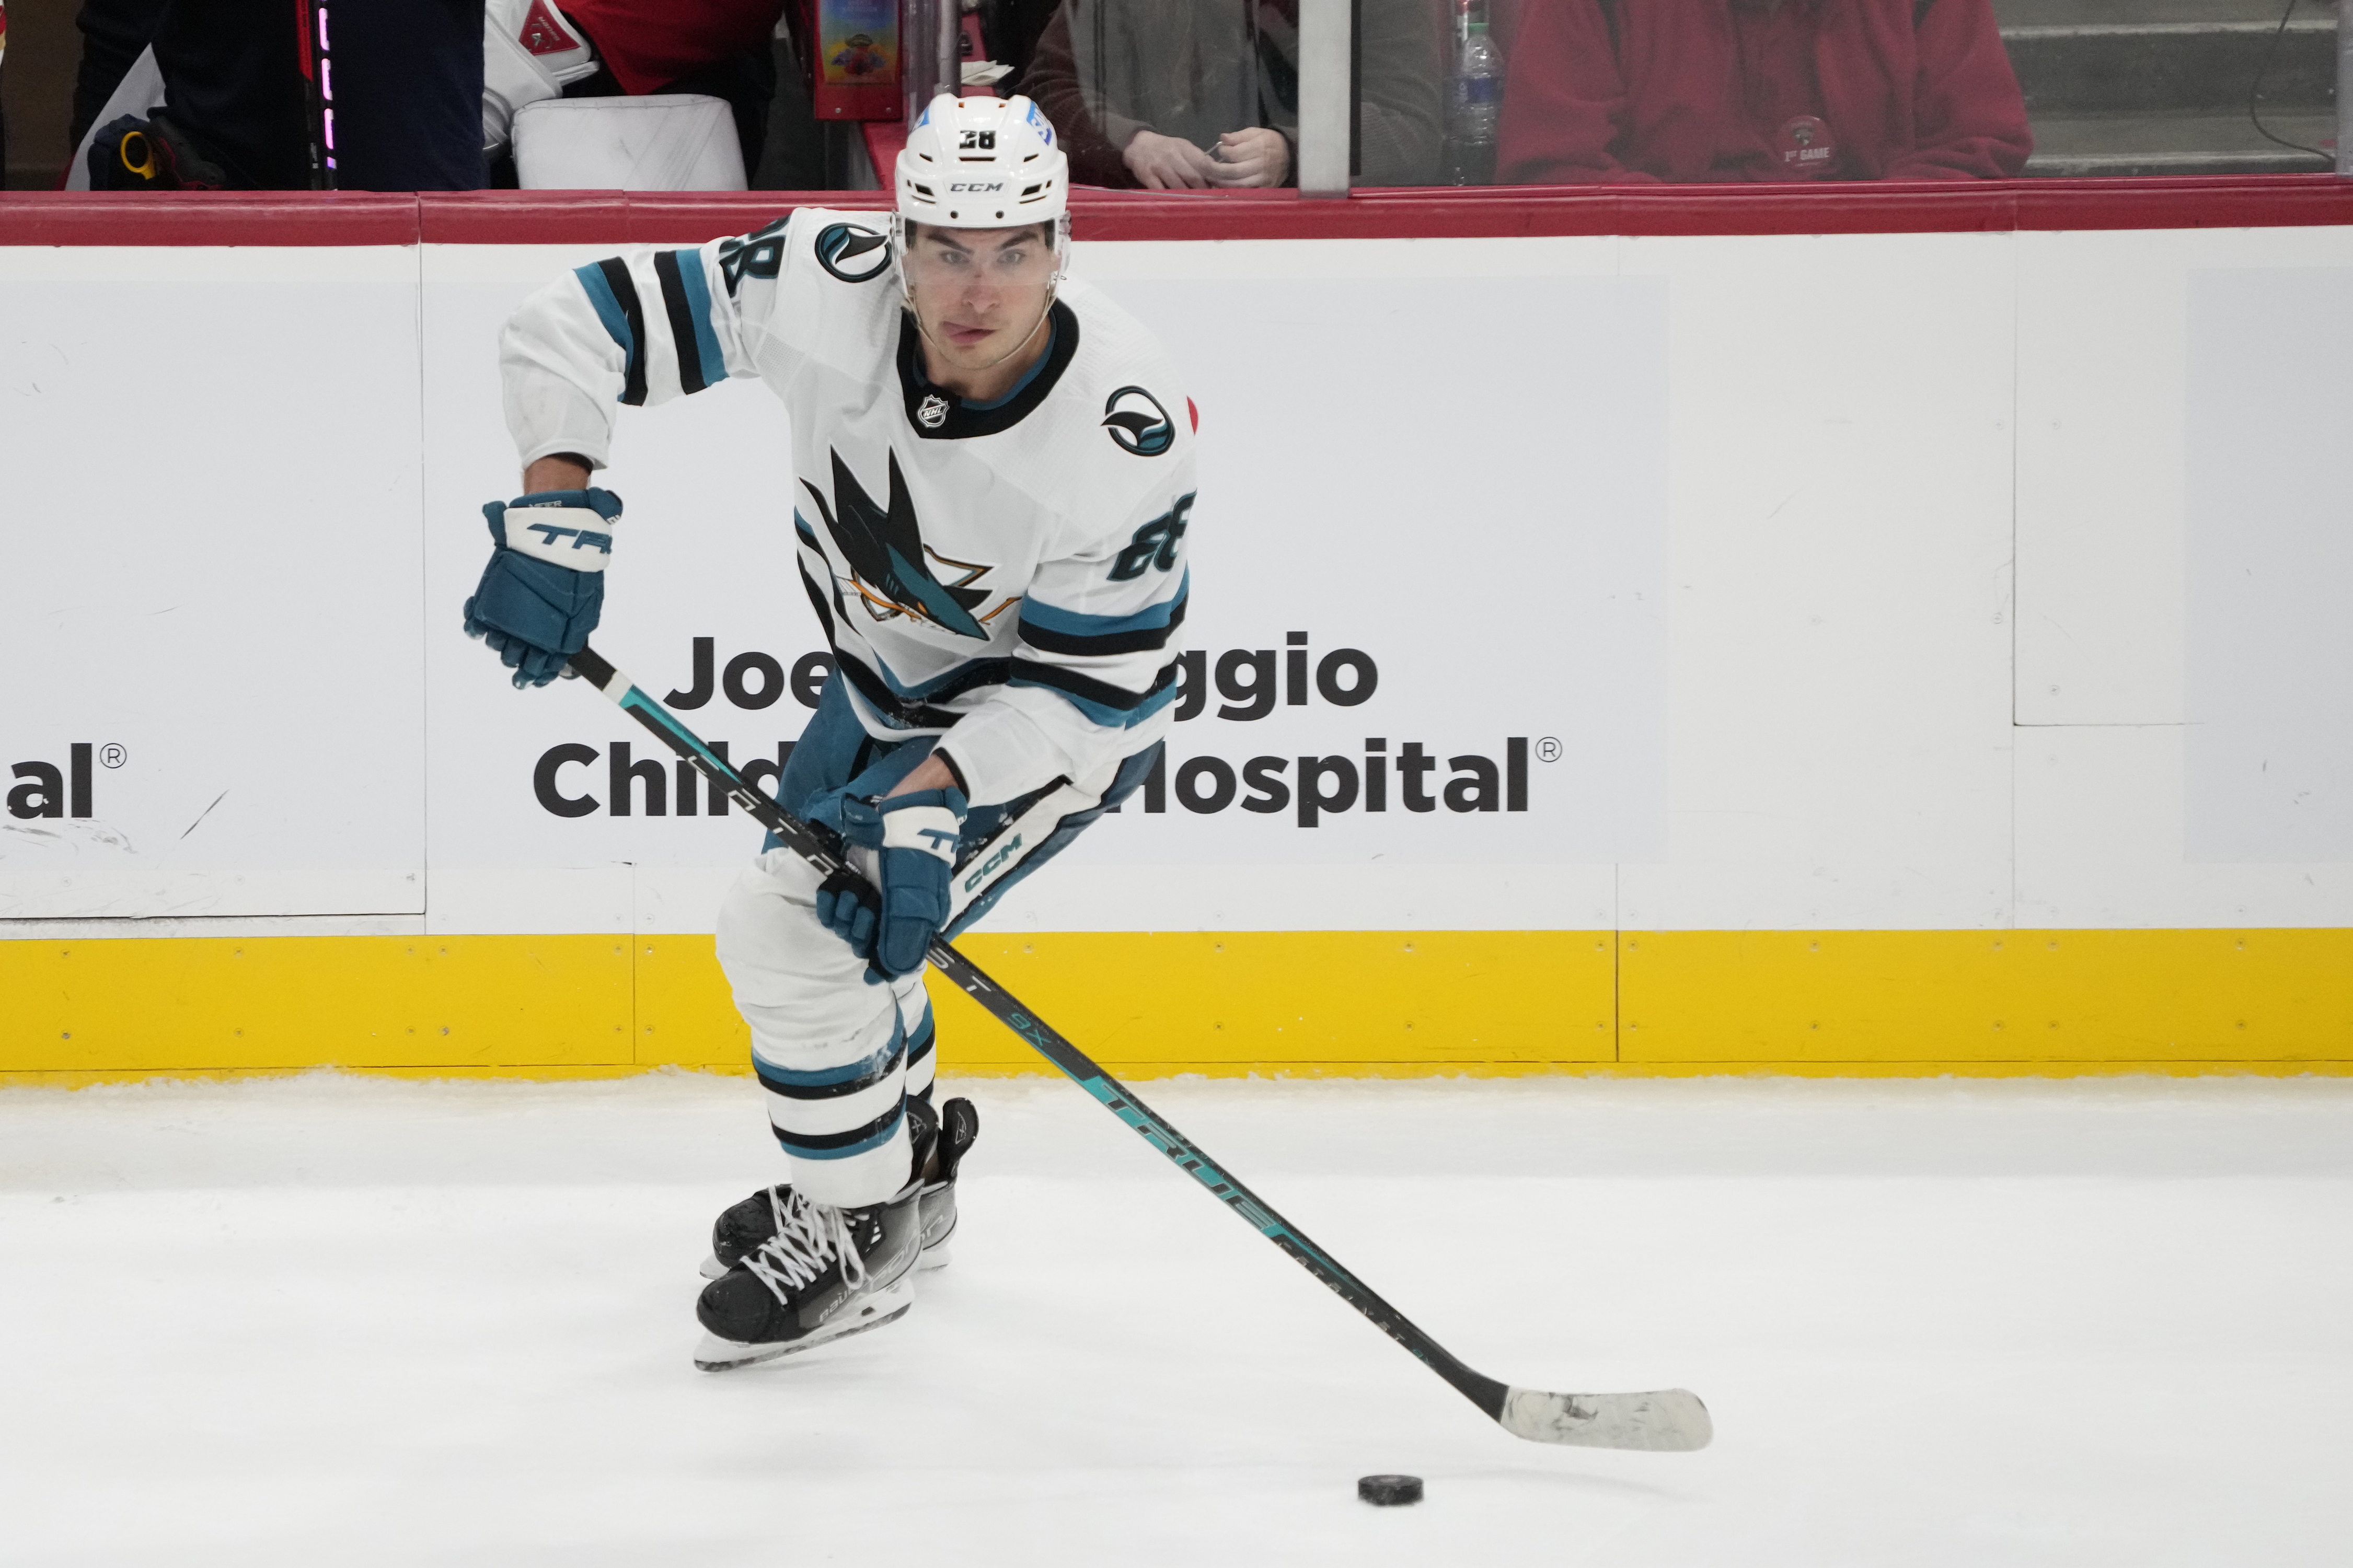 Timo Meier NHL New Jersey Devils: What is Timo Meier's salary? Exploring  the contract details of New Jersey Devils superstar